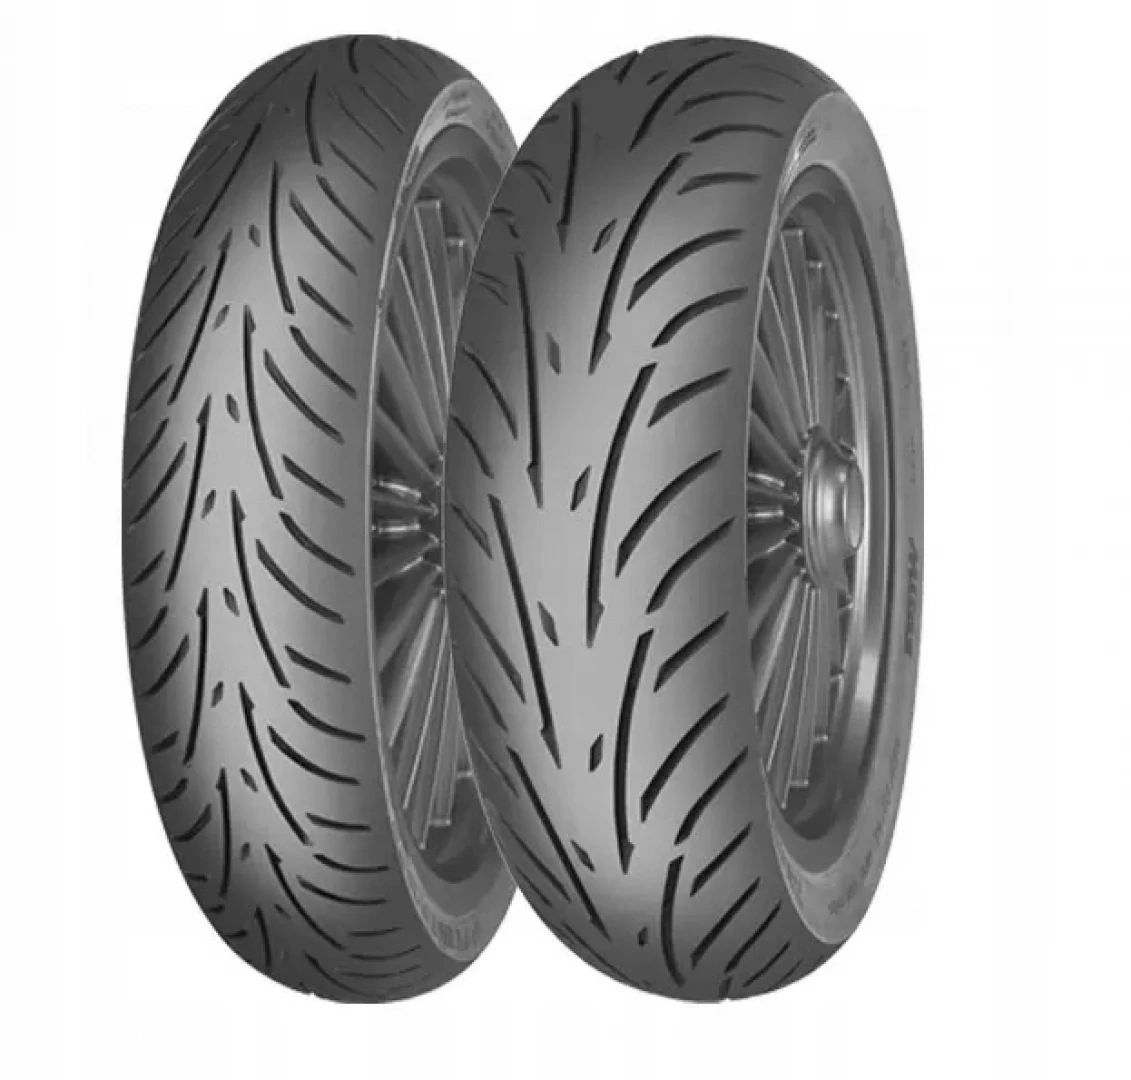 110/80R19 opona MITAS TOURING FORCE TL FRONT 59V